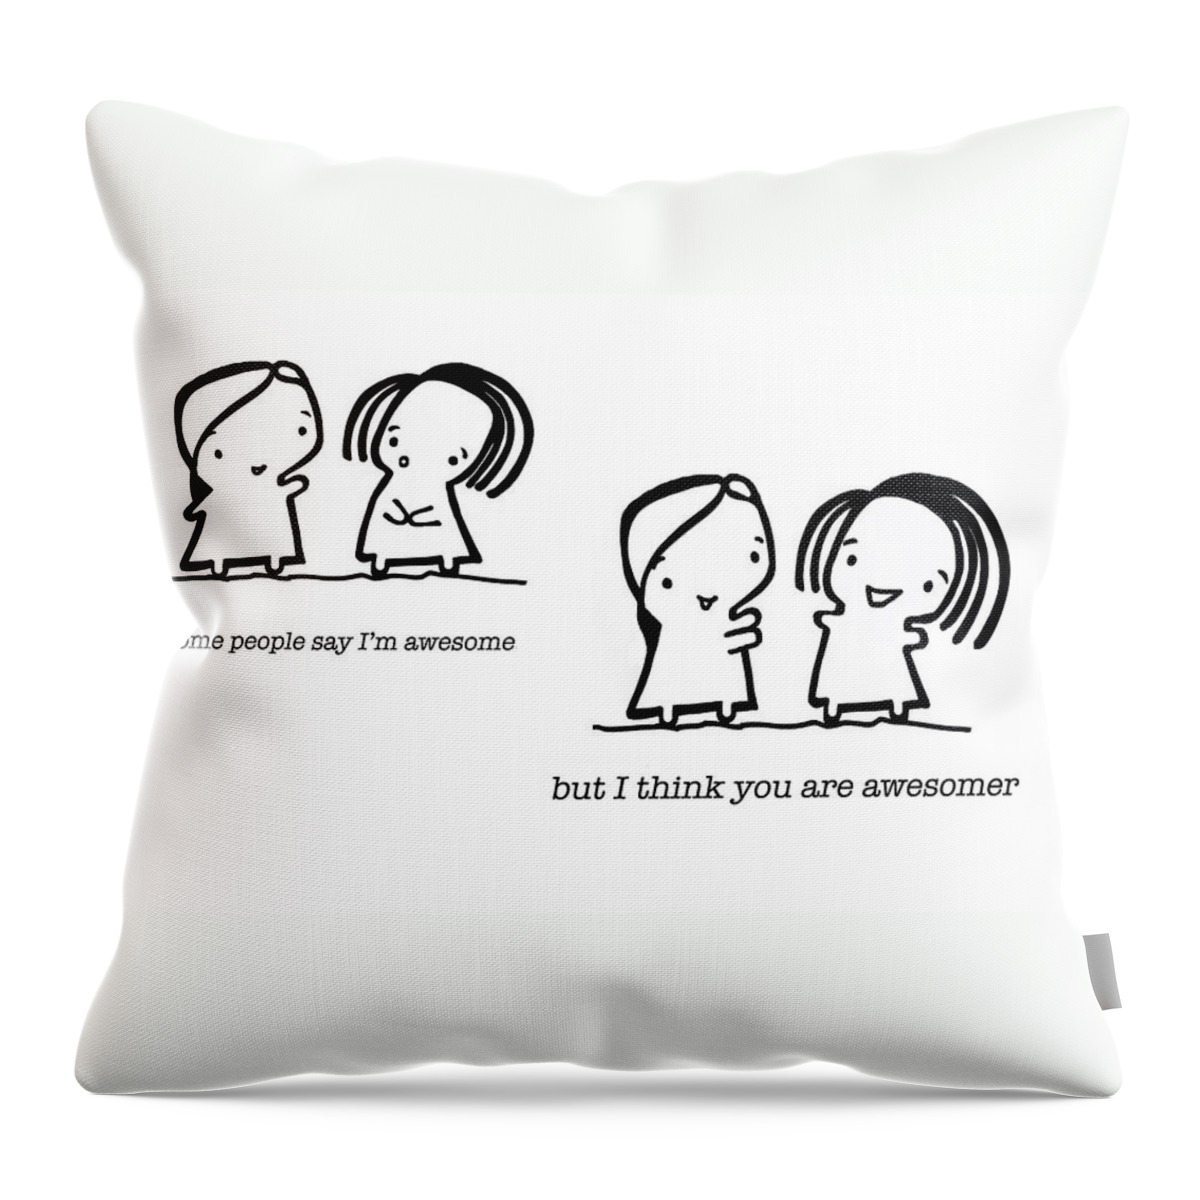 Friendship Throw Pillow featuring the drawing Awesomer #1 by Leanne Wilkes